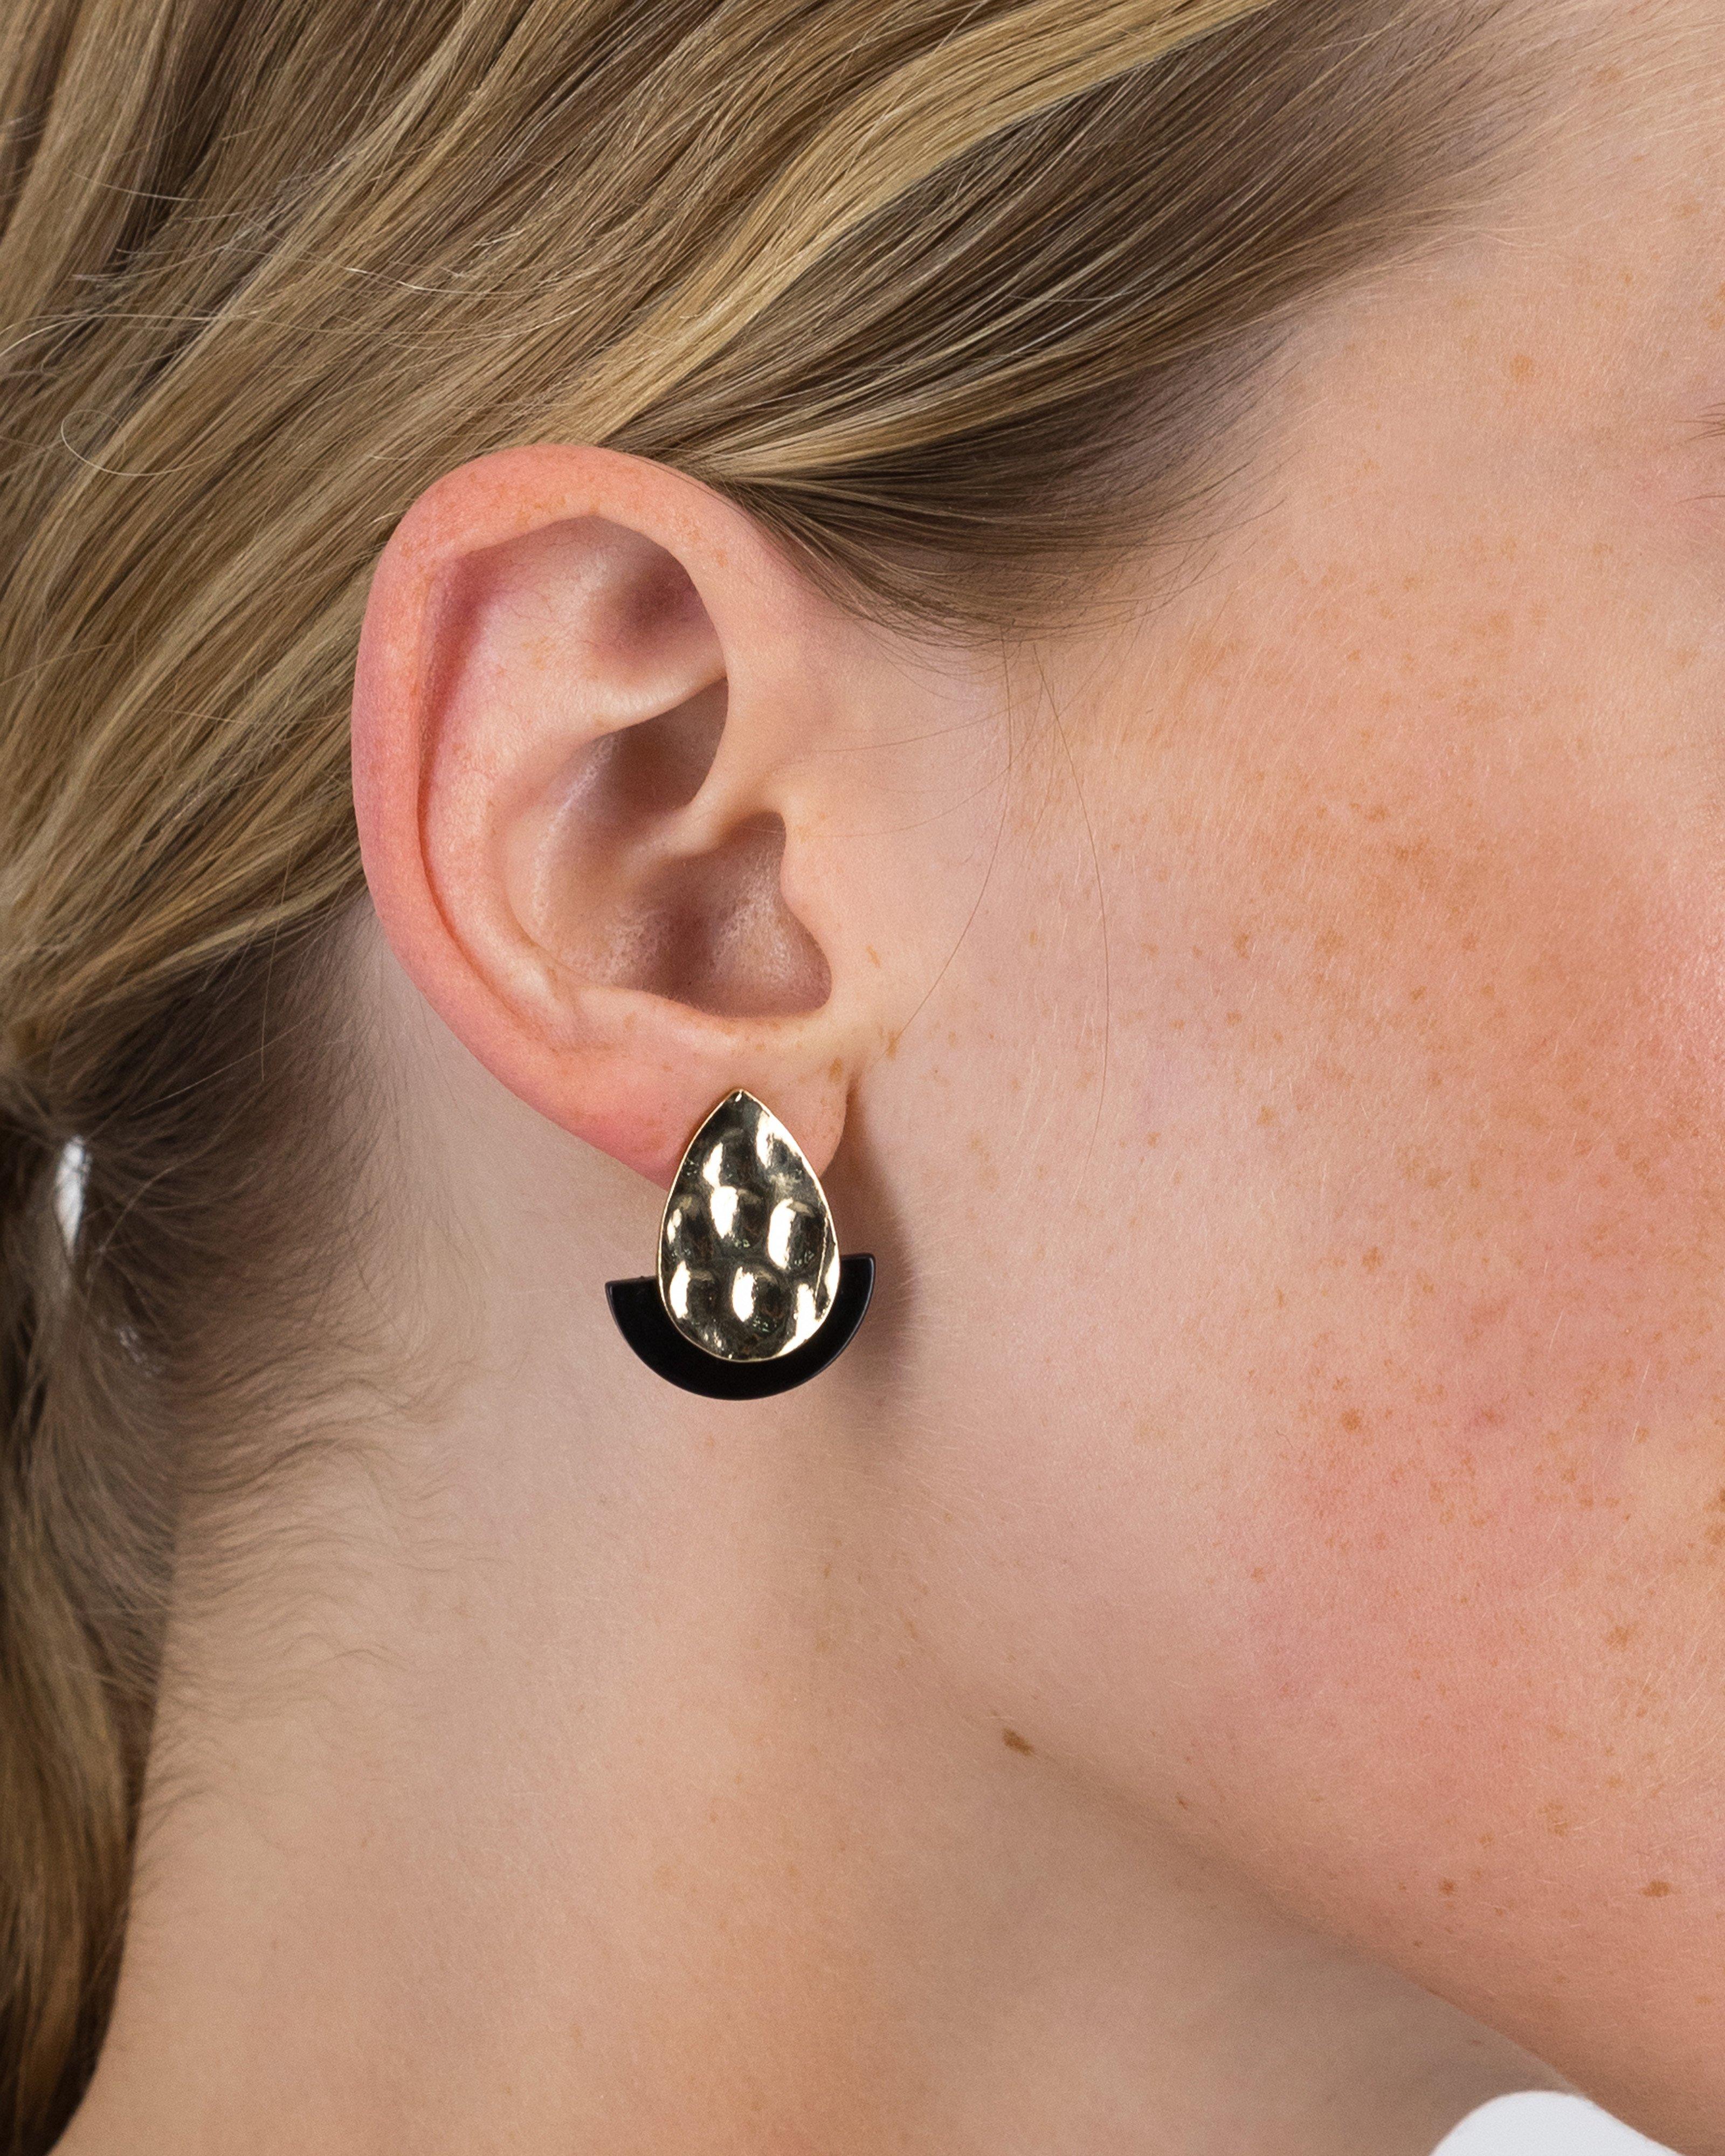 Indented Oval and Resin Fan Stud Earrings -  Black